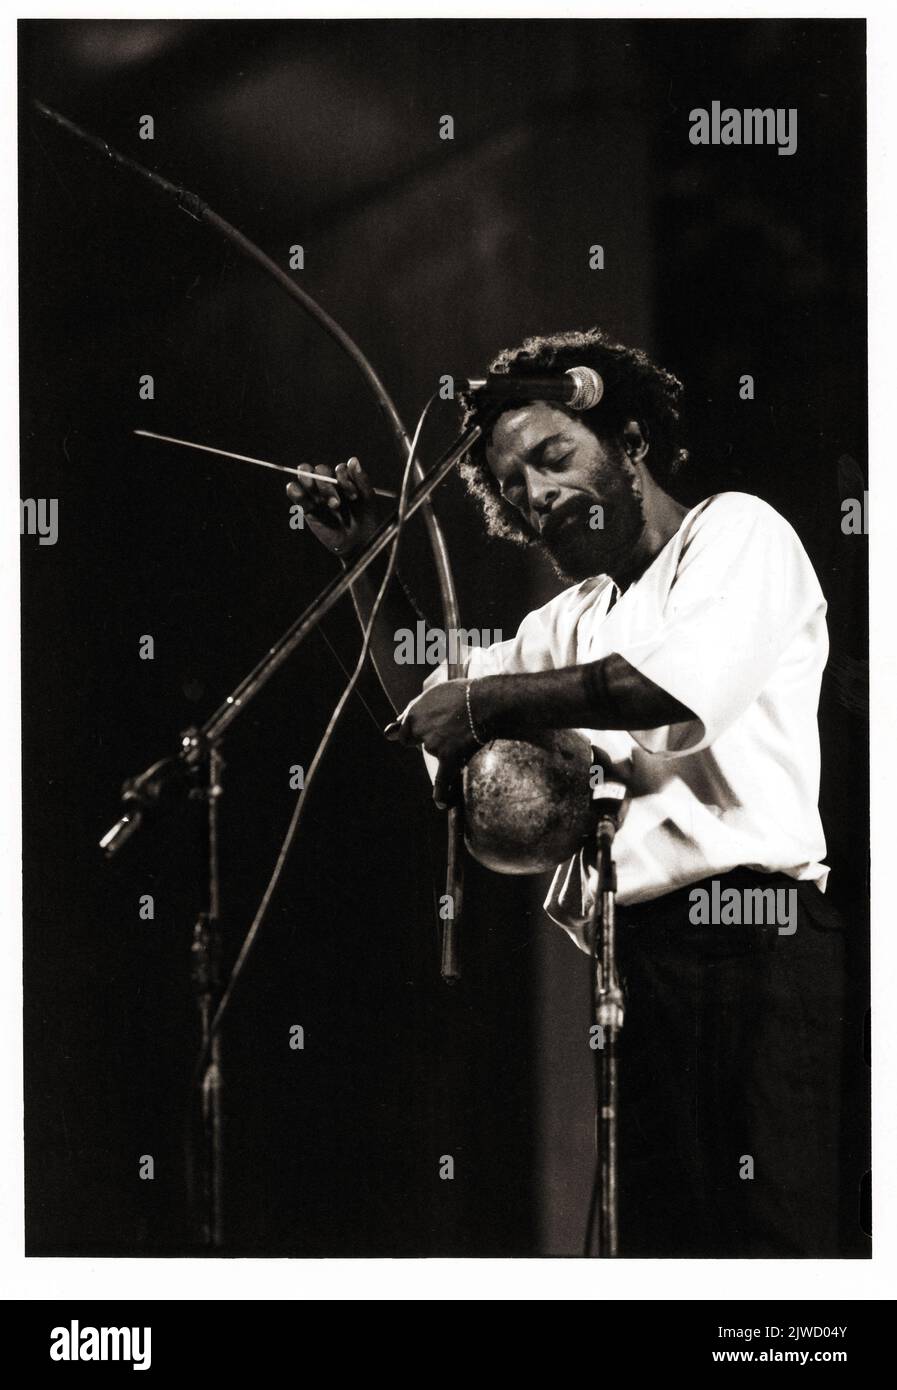 The late Brazilian percussionist Nana Vasconcelos playing the berimbau in concert in New York in 1983. Stock Photo